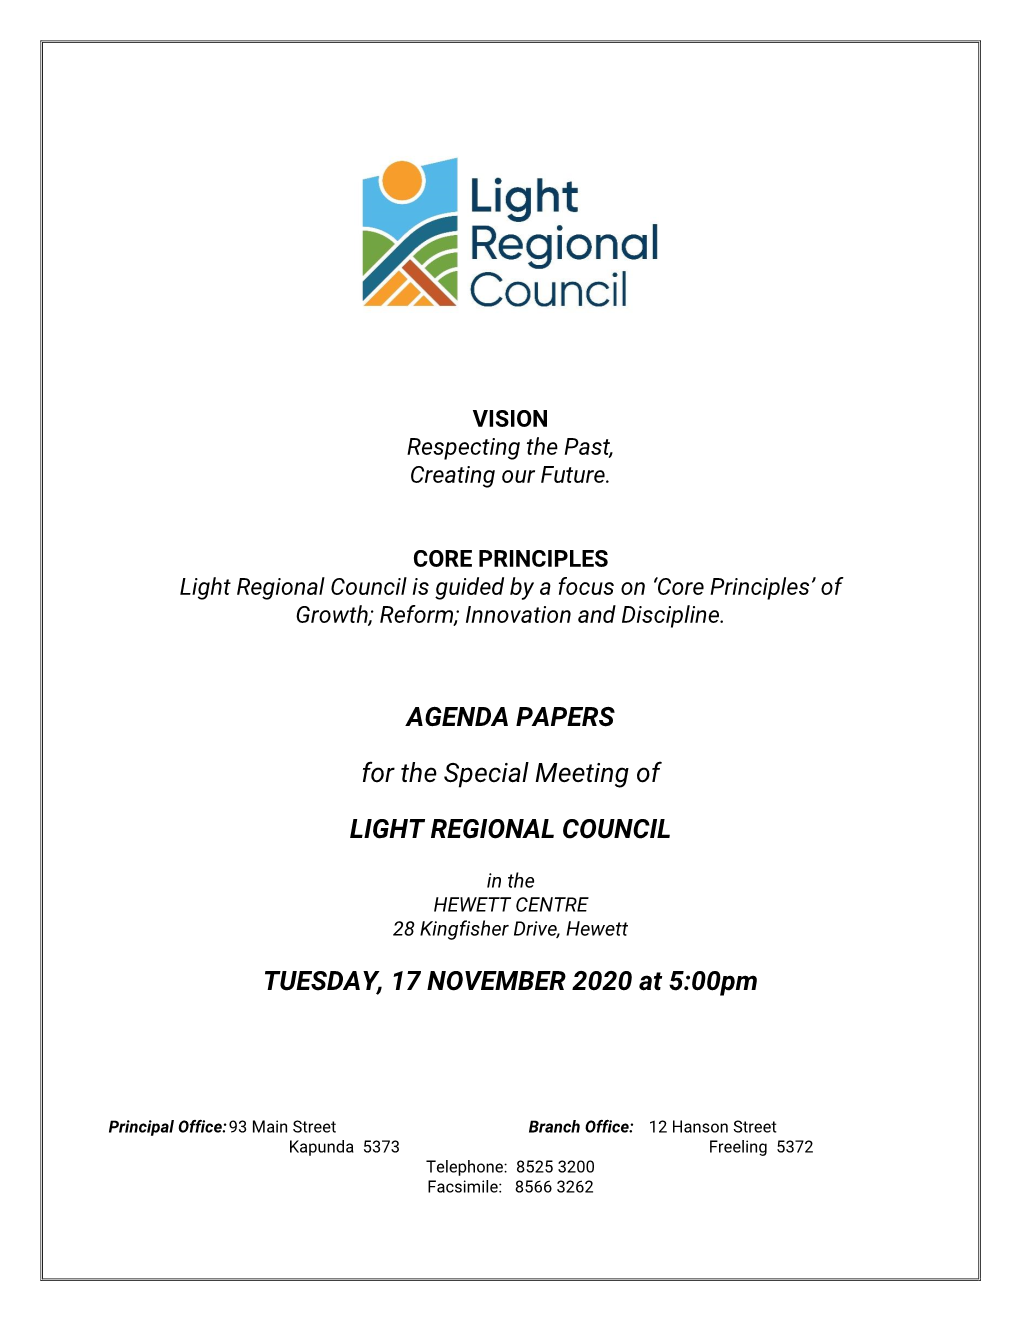 AGENDA PAPERS for the Special Meeting of LIGHT REGIONAL COUNCIL TUESDAY, 17 NOVEMBER 2020 at 5:00Pm